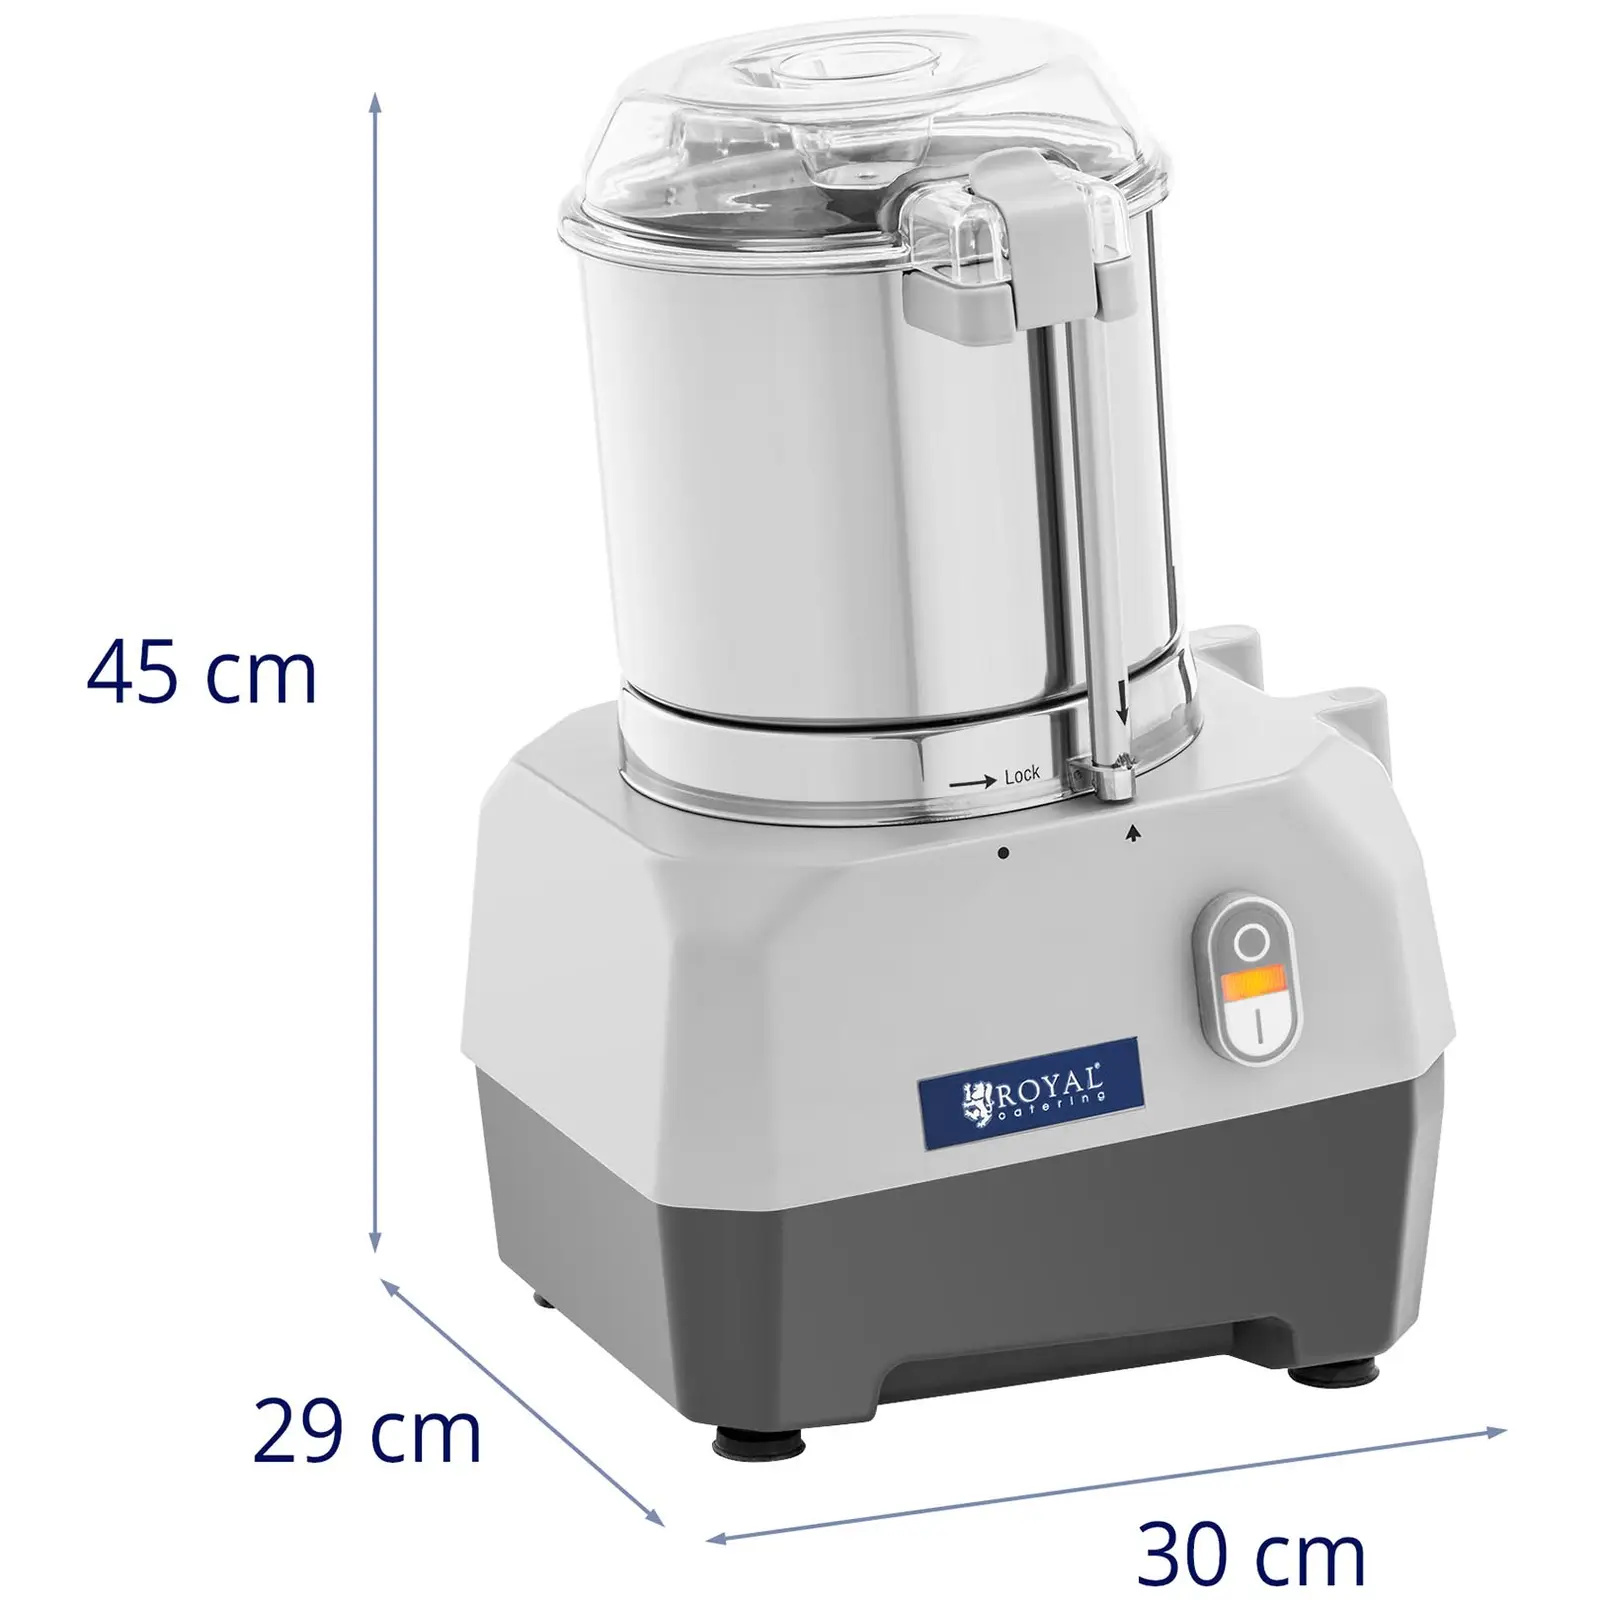 Foodprosessor - 1500 rpm - 5 L - Royal Catering